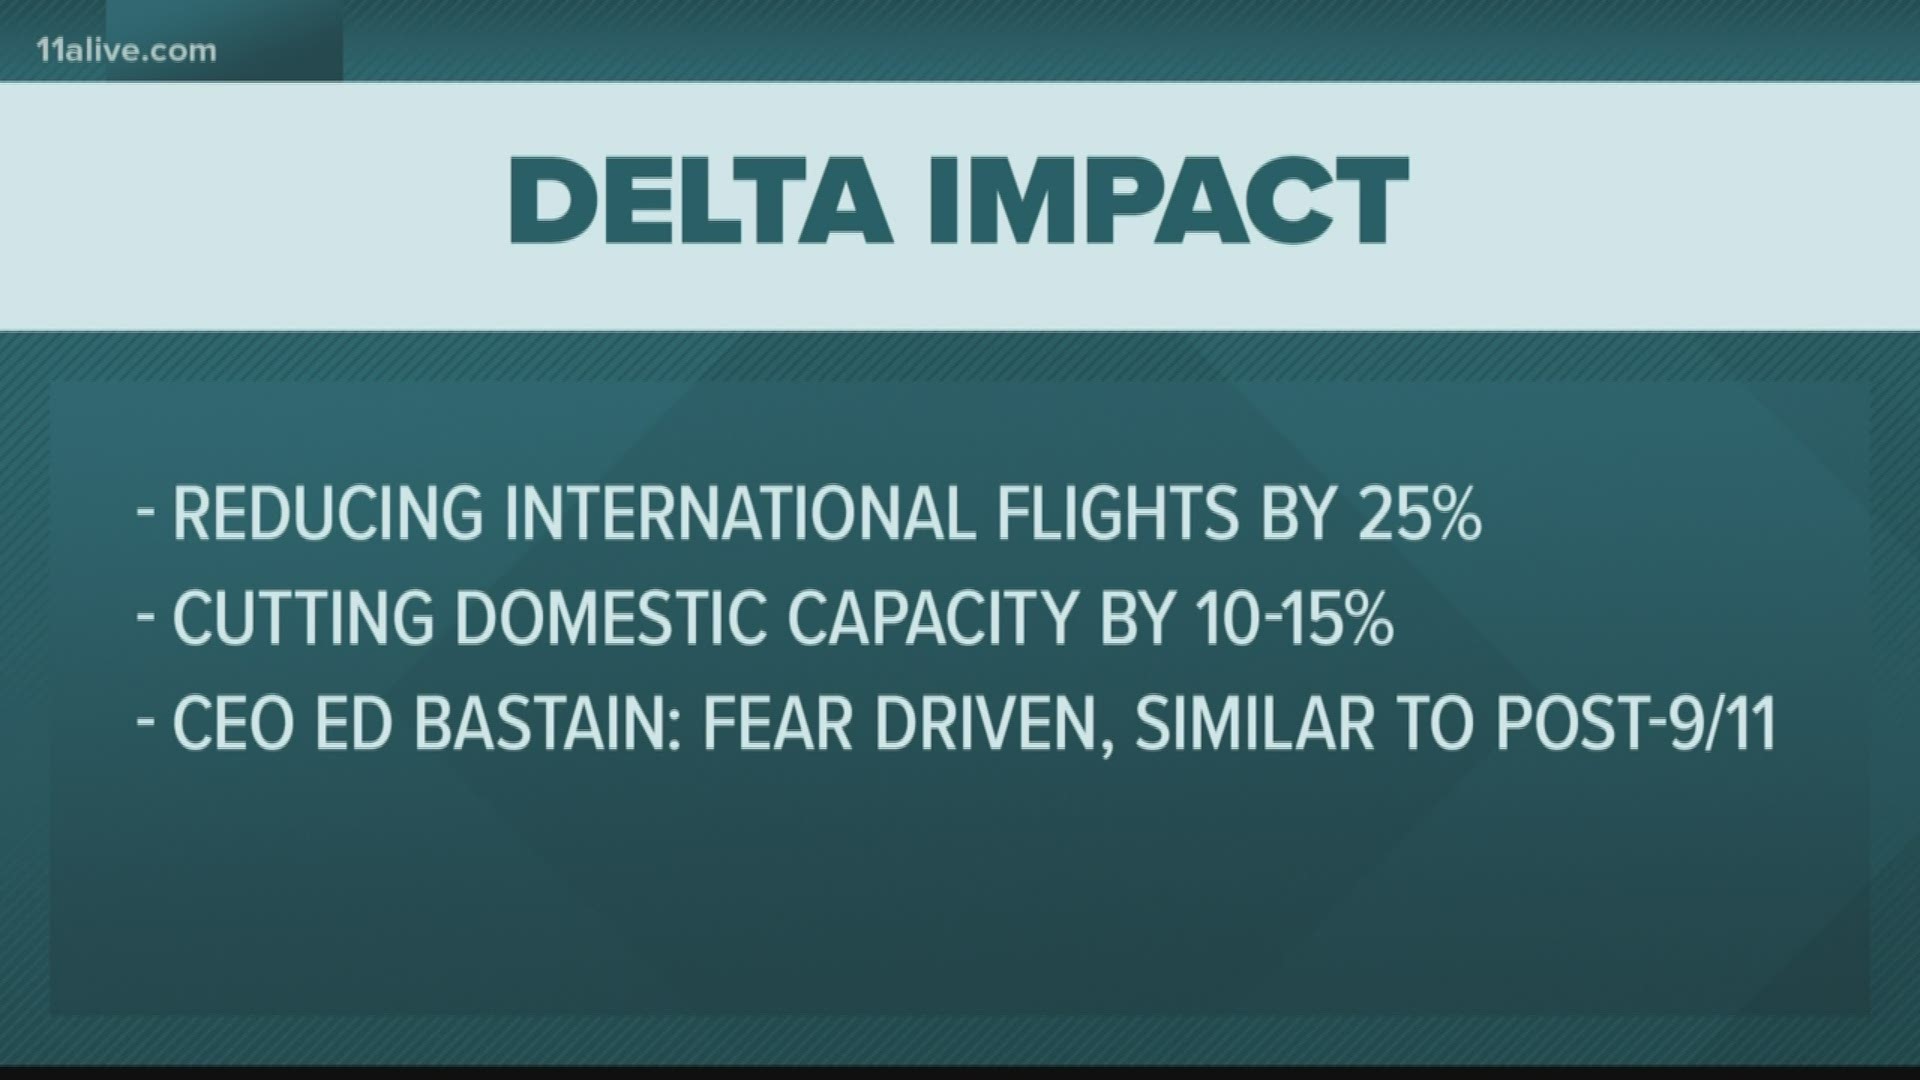 Delta says it's reducing international flights by up to 25-percent and domestic capacity by 10 to 15 percent.